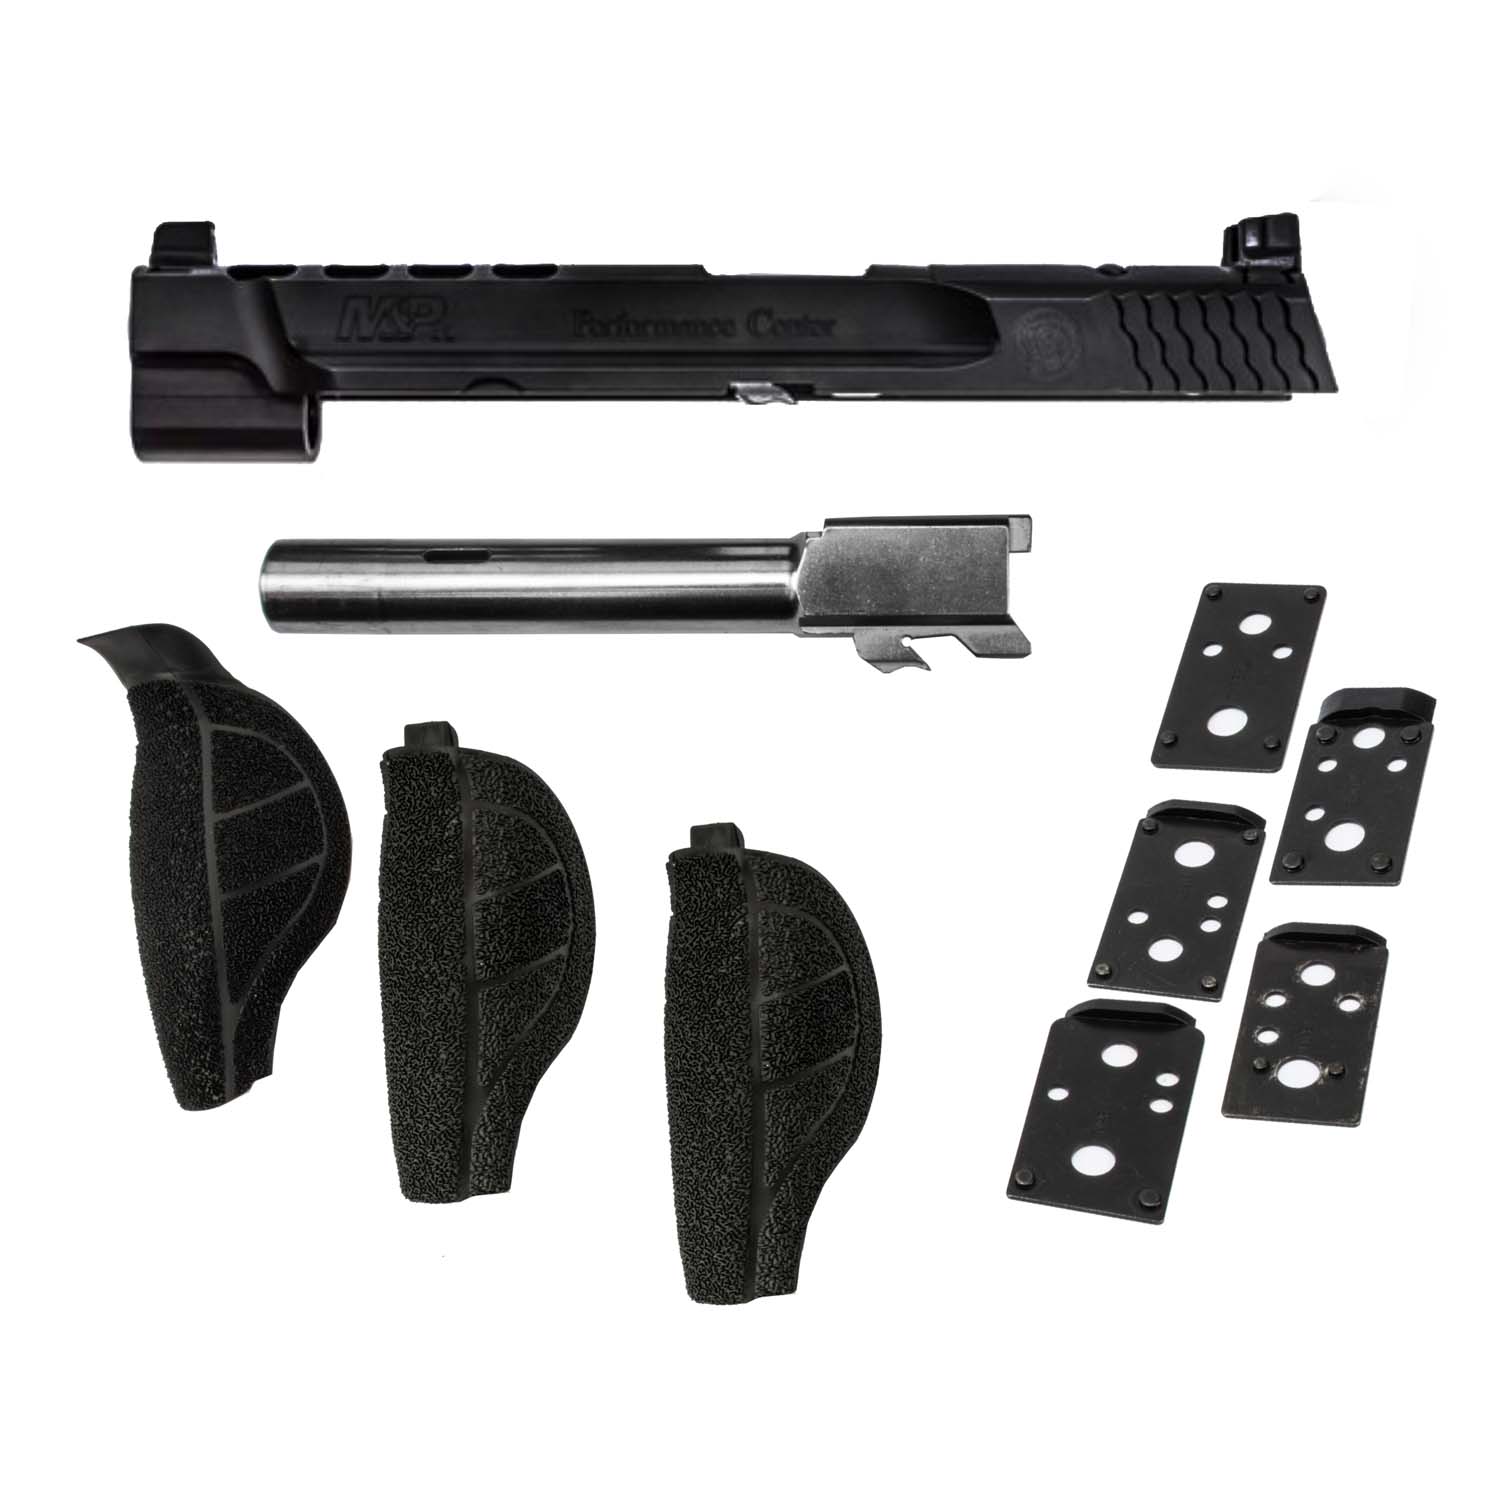 Smith & Wesson M&P Performance Center 9mm Ported Slide Kit w/ 5 